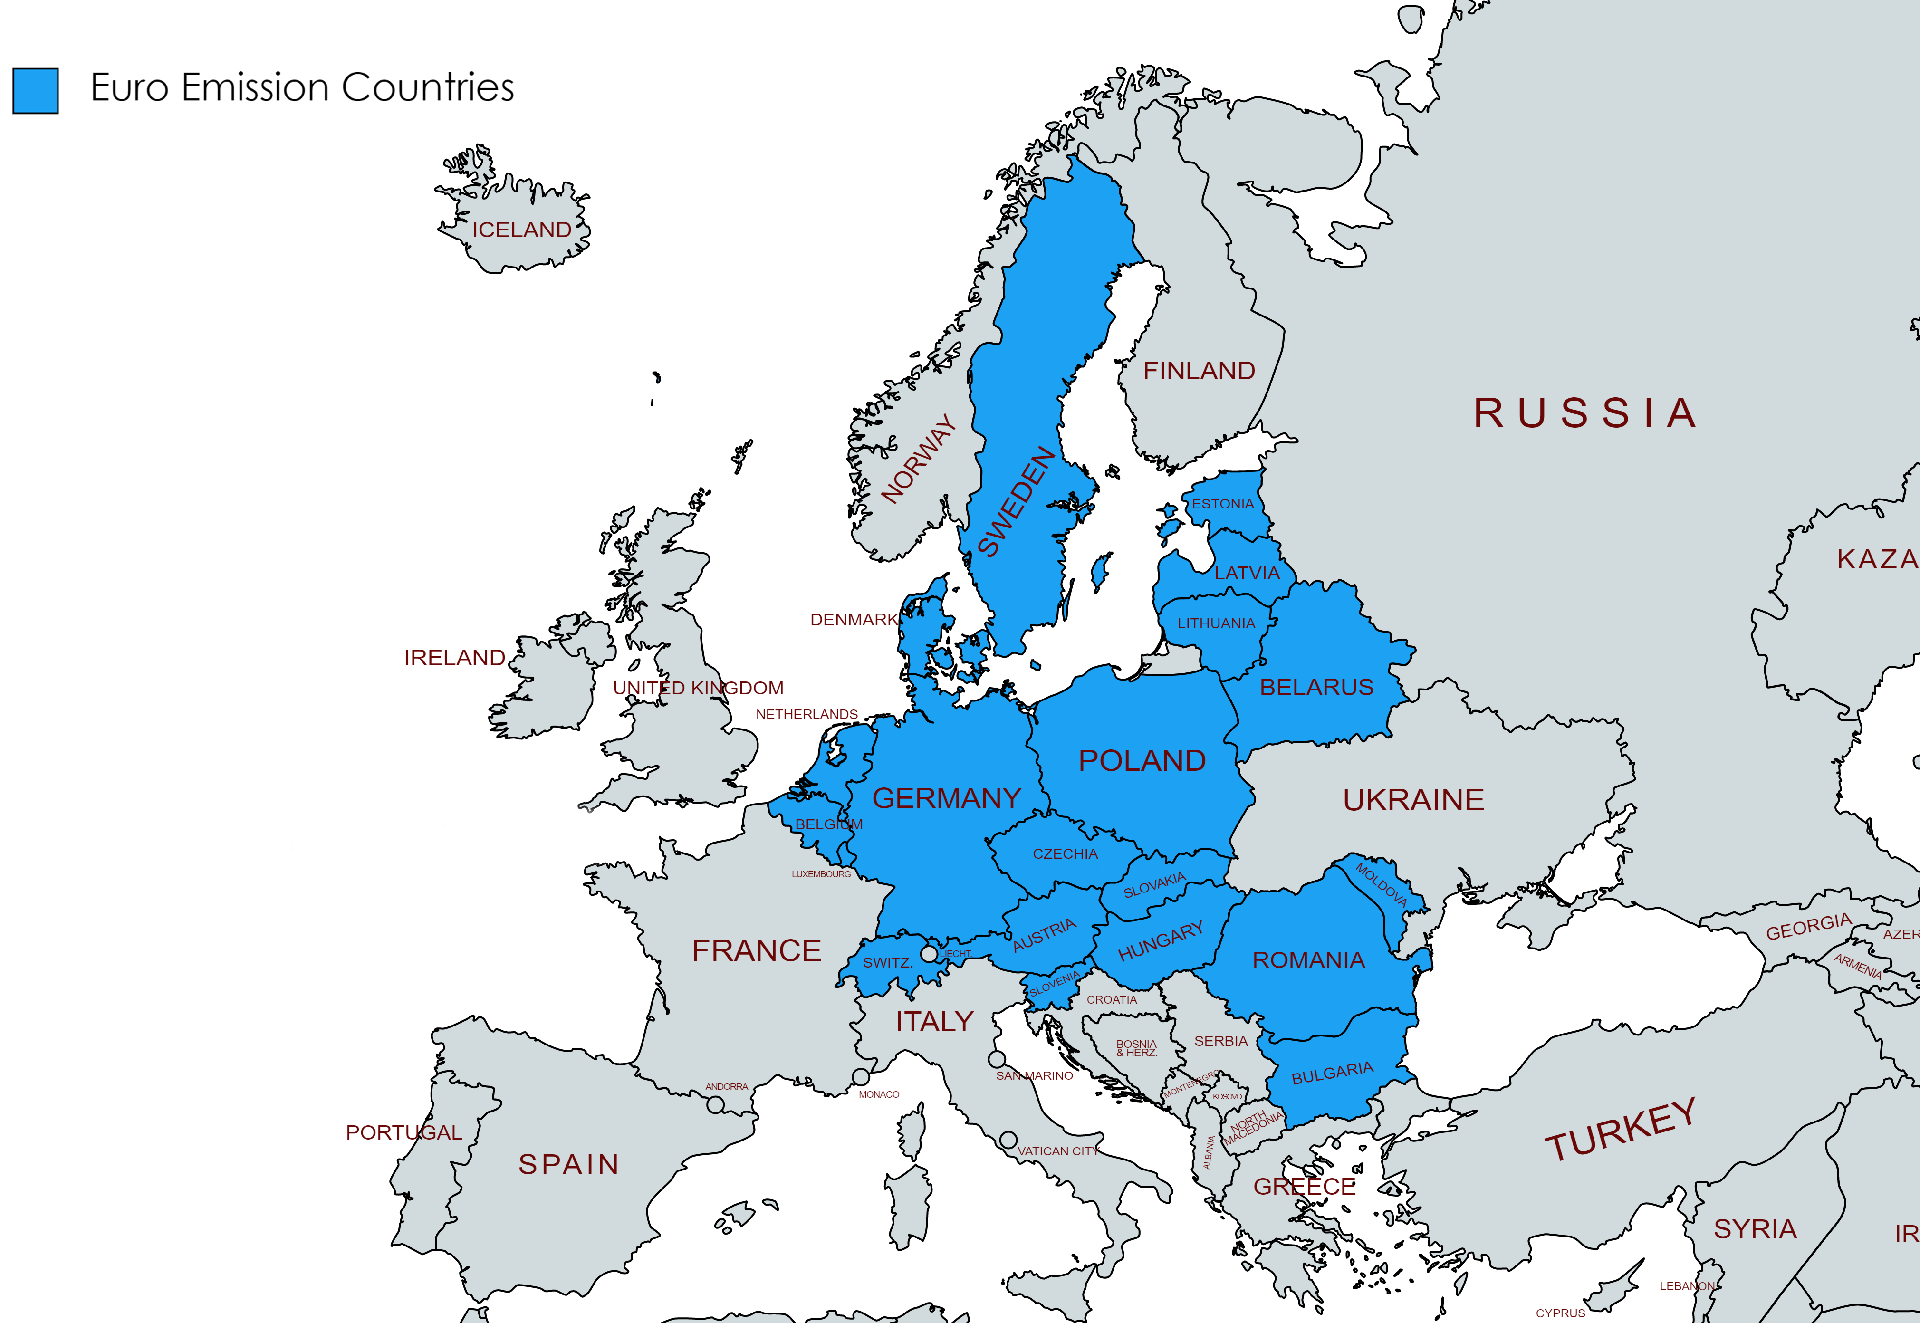 European Countries with Euro Emission Standards, countries vehicle emission